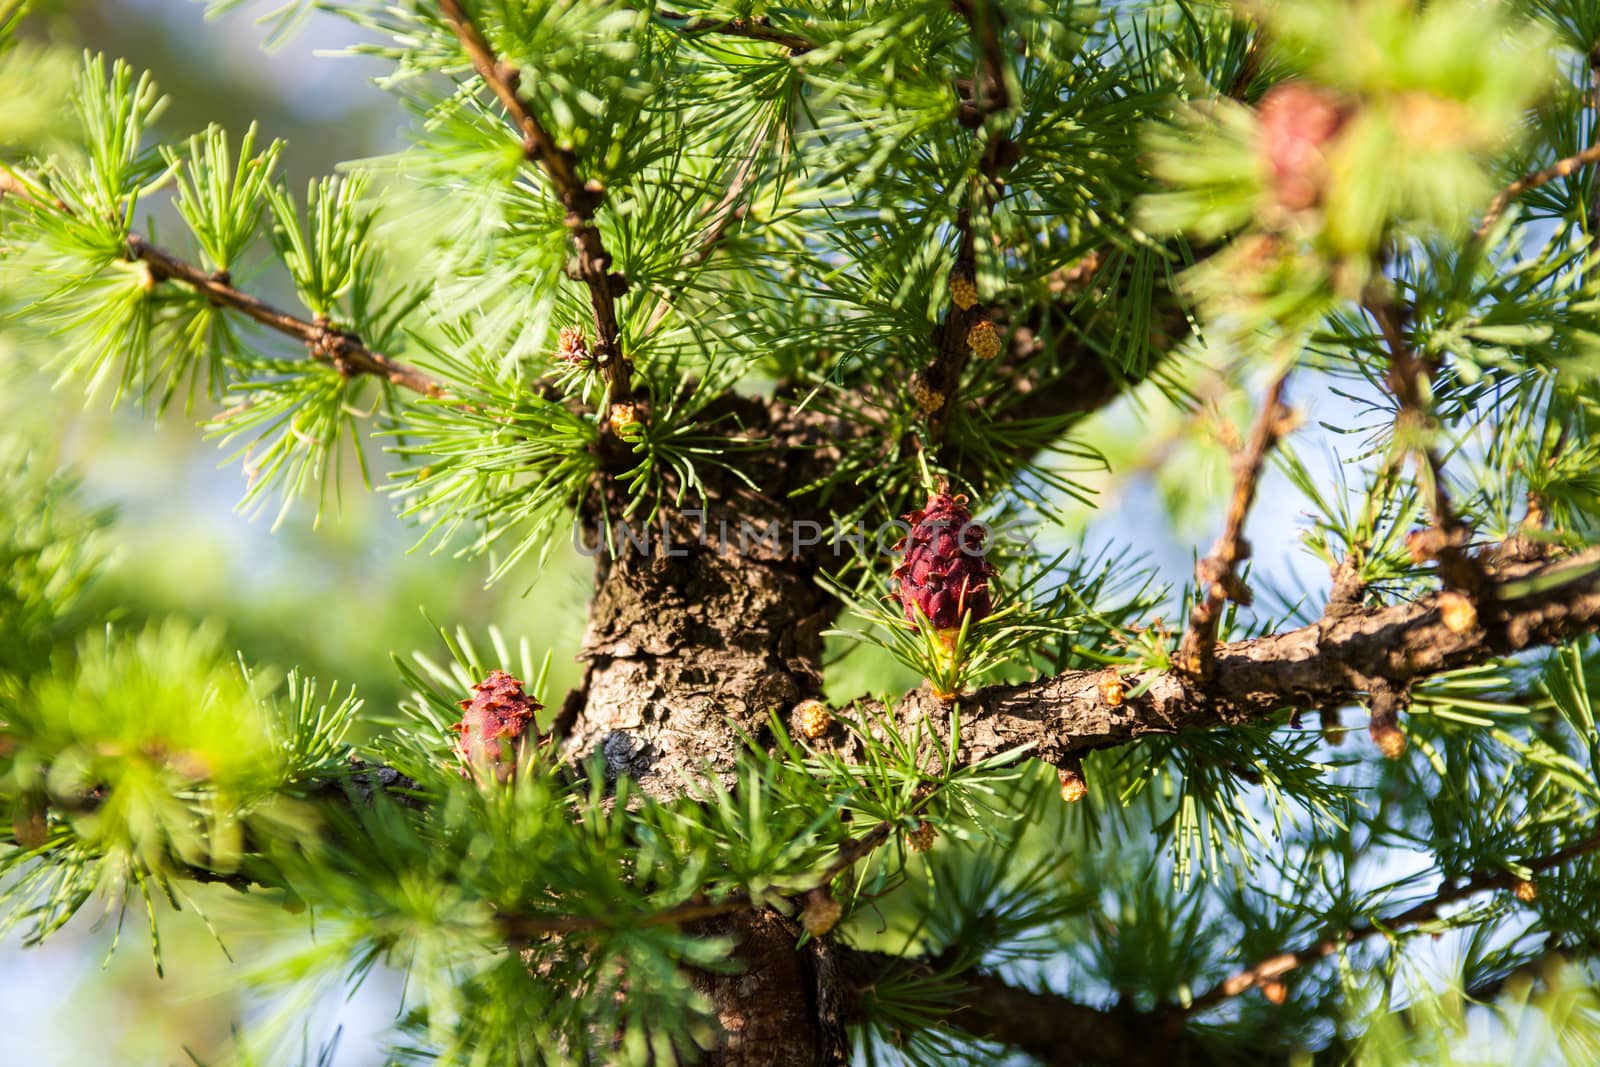 Pine branches with female and male cones by rootstocks